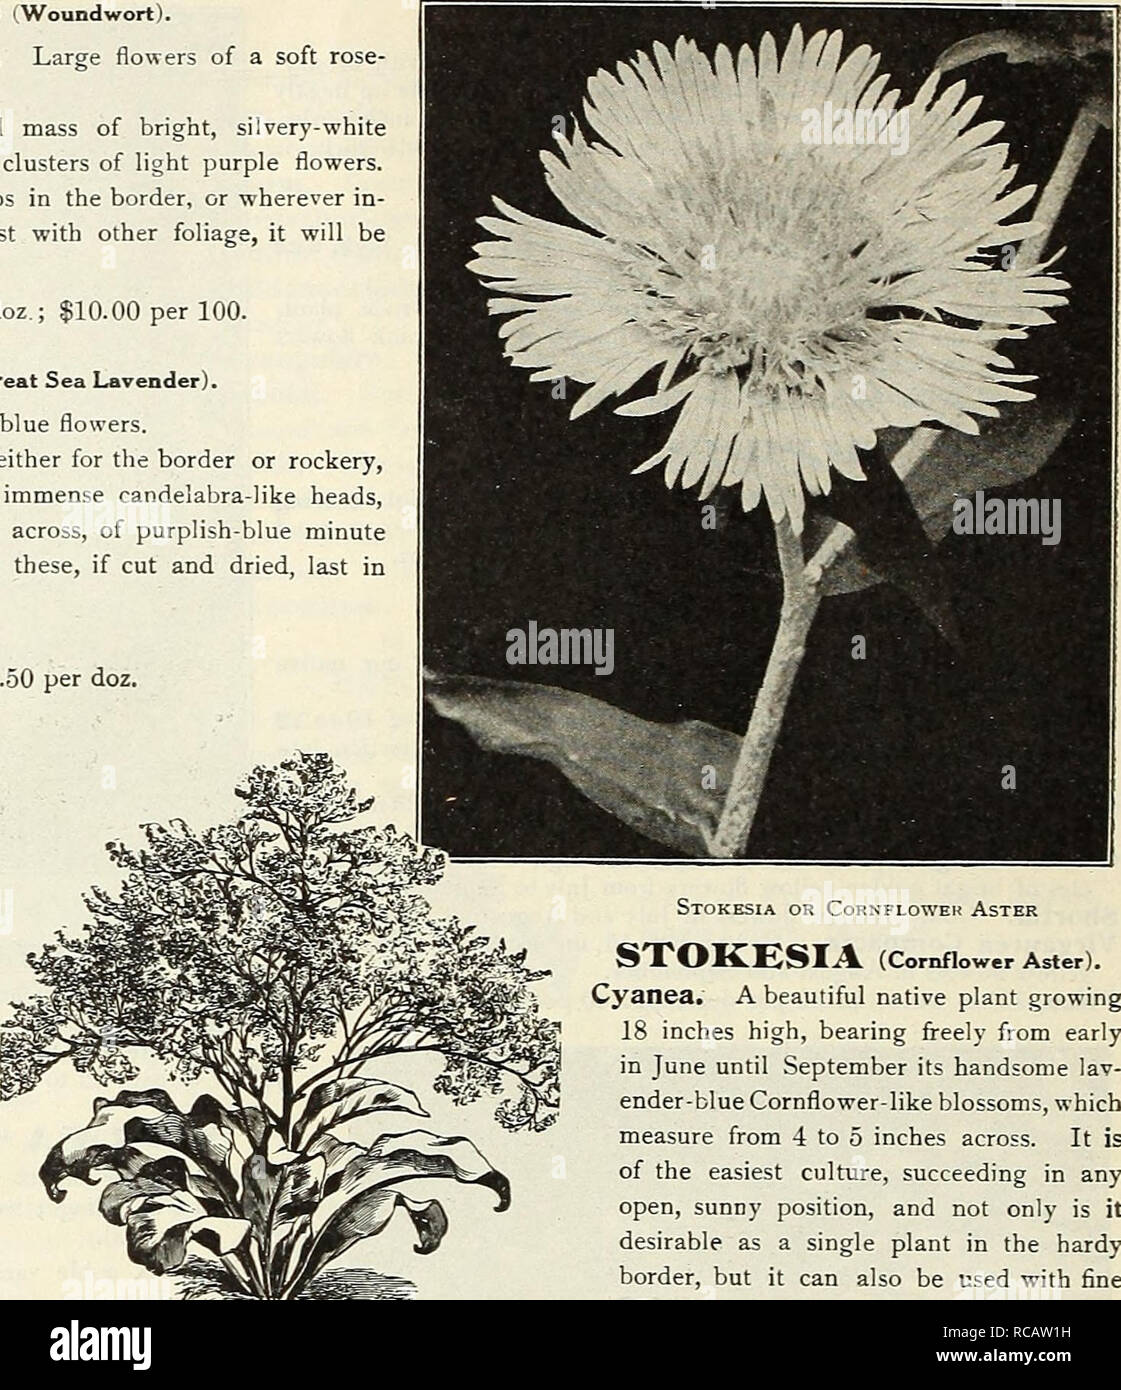 . Dreer's garden book 1916. Seeds Catalogs; Nursery stock Catalogs; Gardening Equipment and supplies Catalogs; Flowers Seeds Catalogs; Vegetables Seeds Catalogs; Fruit Seeds Catalogs. 240 Or IHMafADRBR-IHIIADftPHIA-M-^fHARPy PEREMIilAL PbAMTS STACHYS (Woundwort). Betonica Grandiflora (Betony). Large flowers of a soft rose- color; June ?nd July; 15 inches. Lanata. Forms a densely leaved mass of bright, silvery-white woolly foliage and inconspicuous clusters of light purple flowers. As a plant for edging or for clumps in the border, or wherever in- tense color is desired for contrast with other  Stock Photo